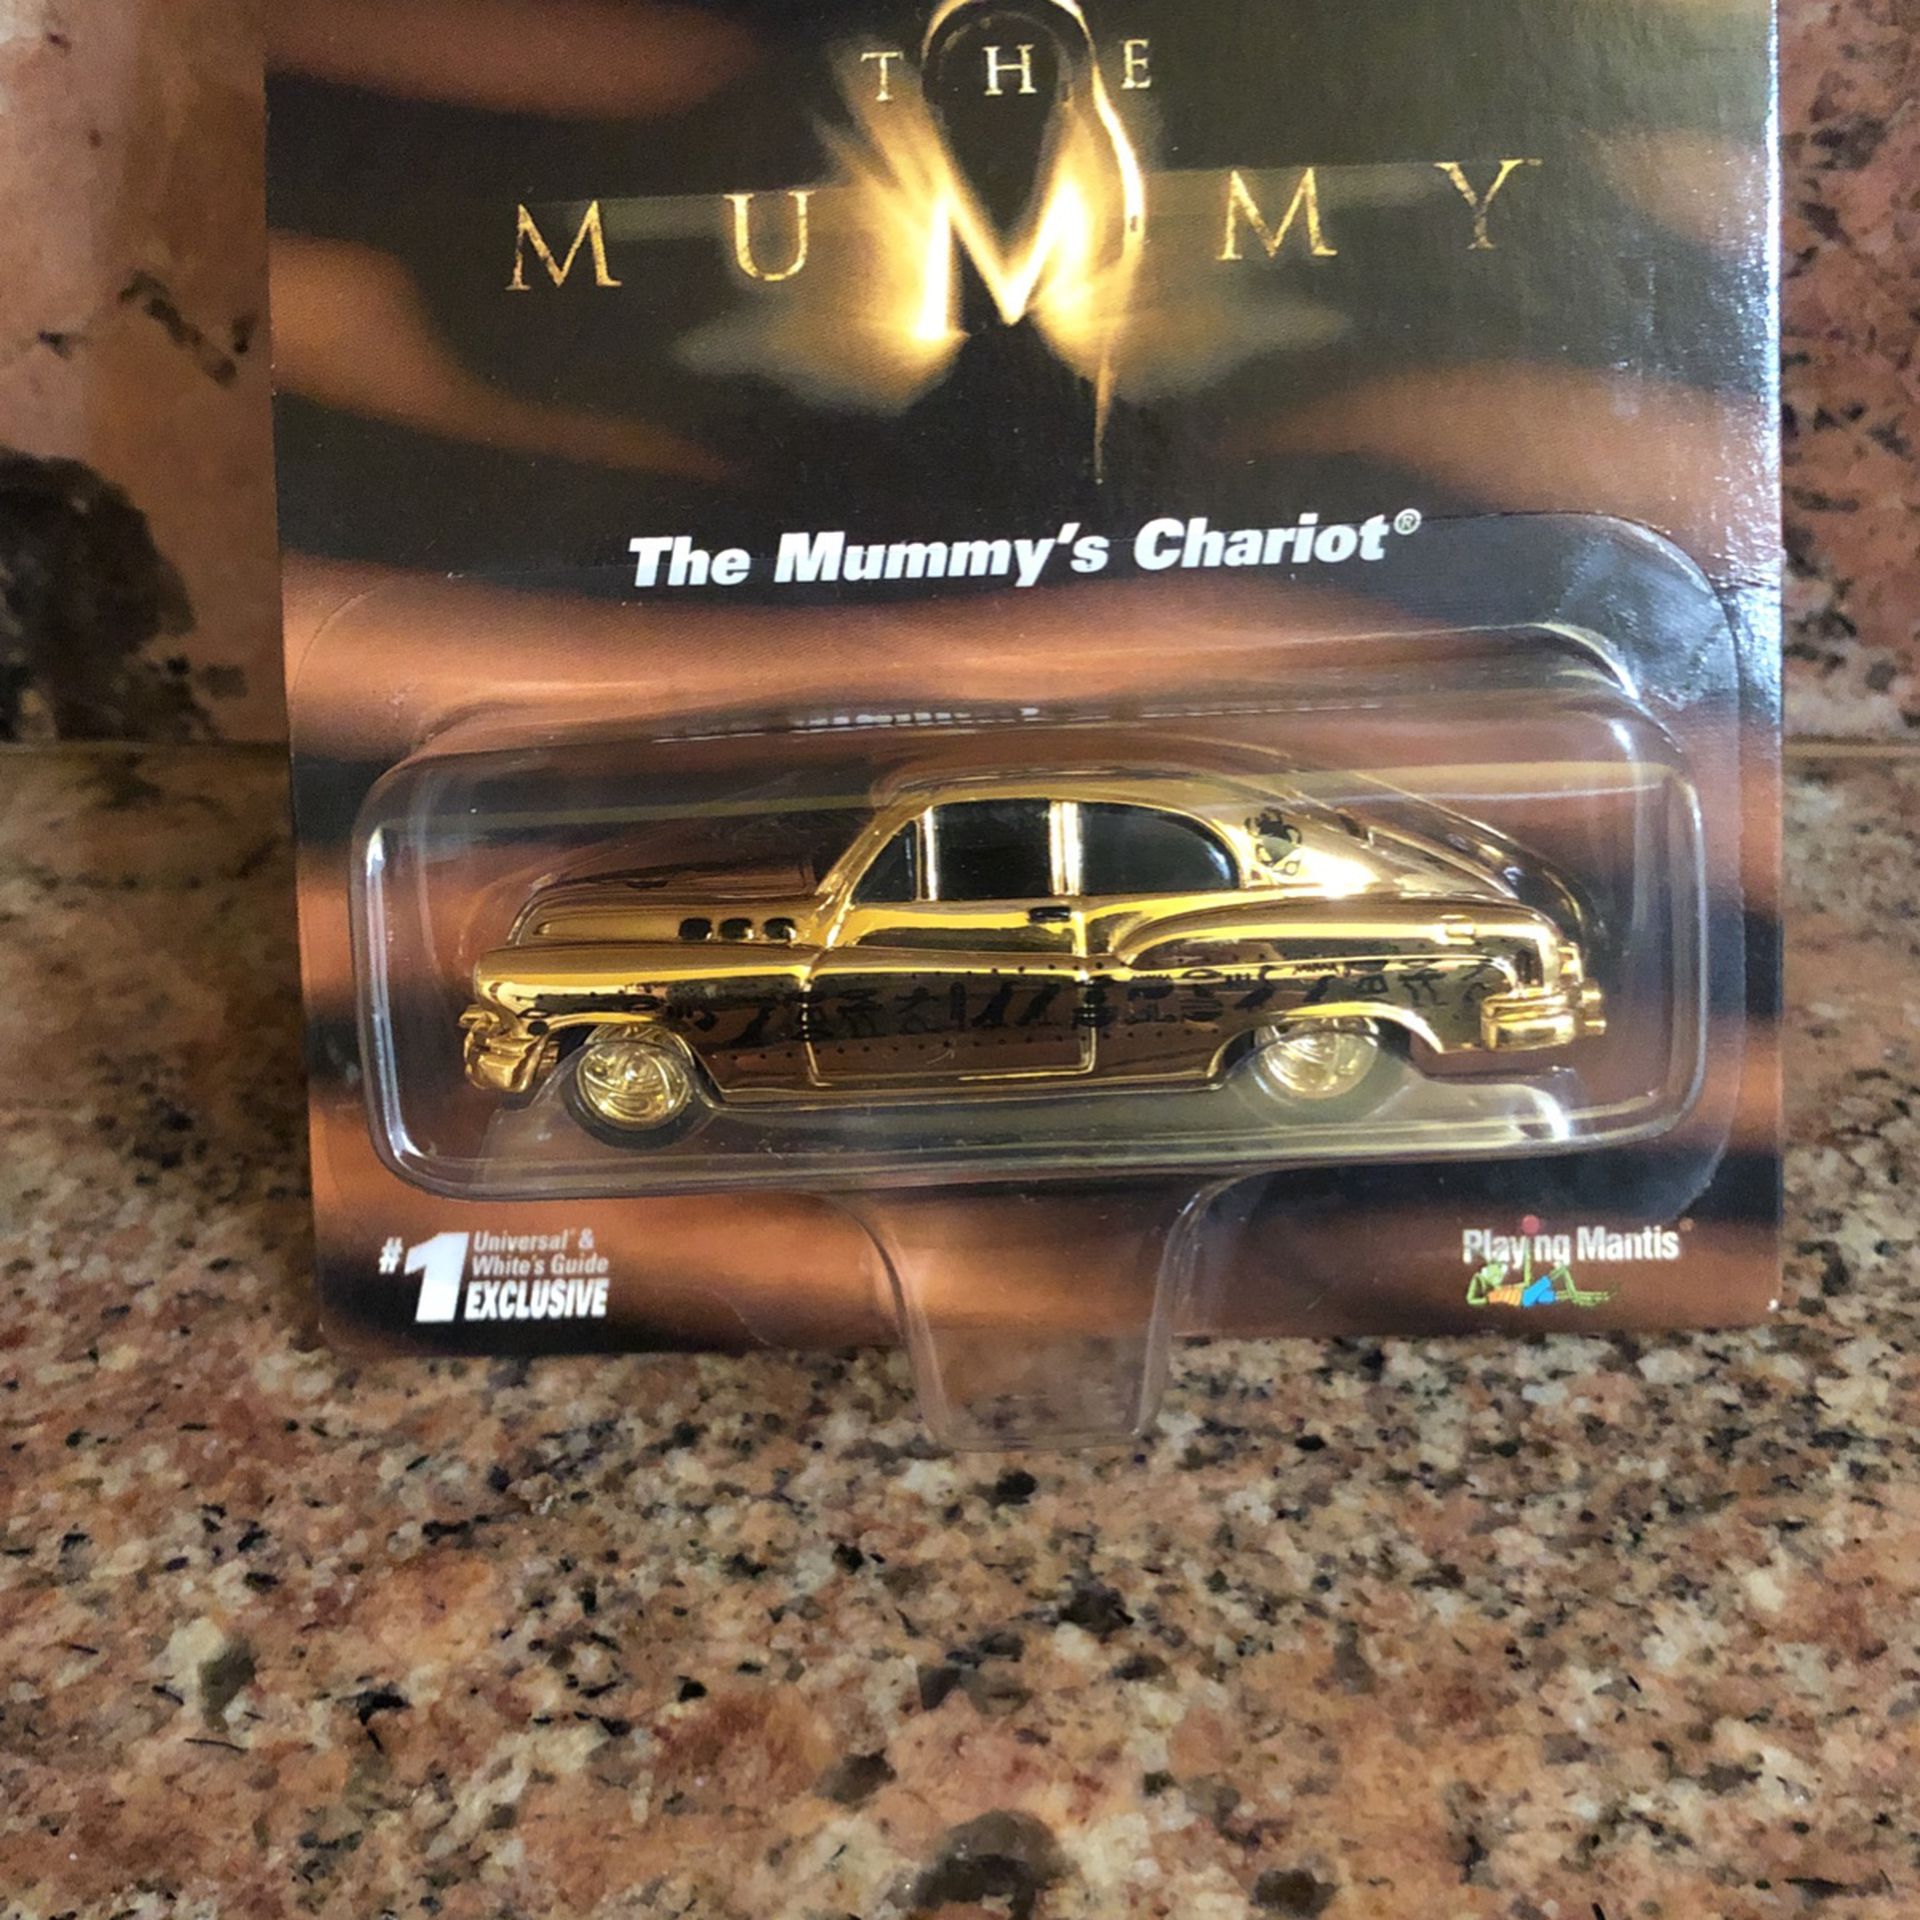 The Mummy’s Chariot Toy Car